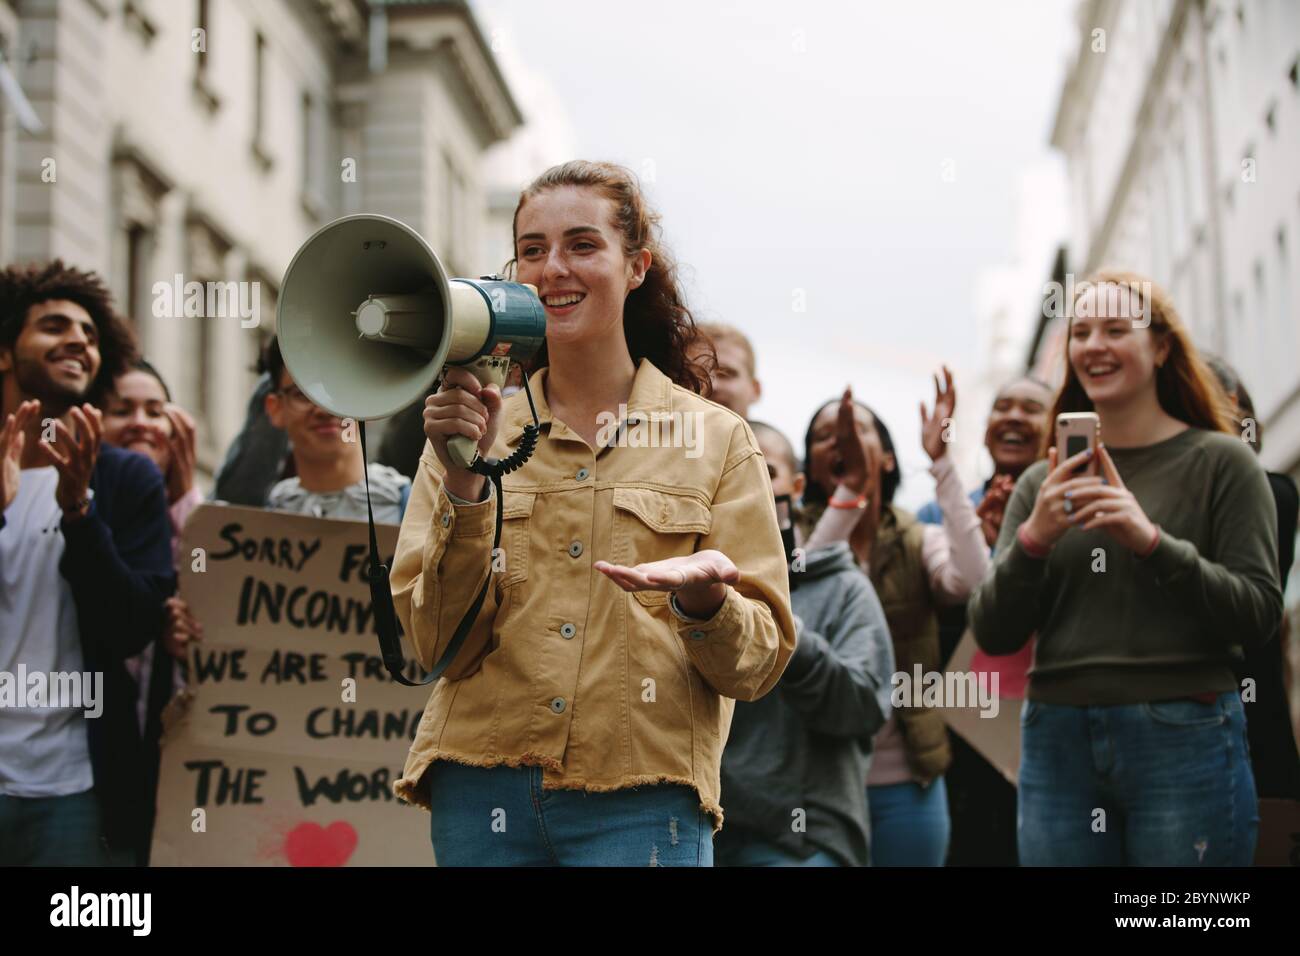 Woman with a megaphone in a rally outdoors on road. Woman standing outdoors with group of demonstrator clapping and celebrating. Stock Photo